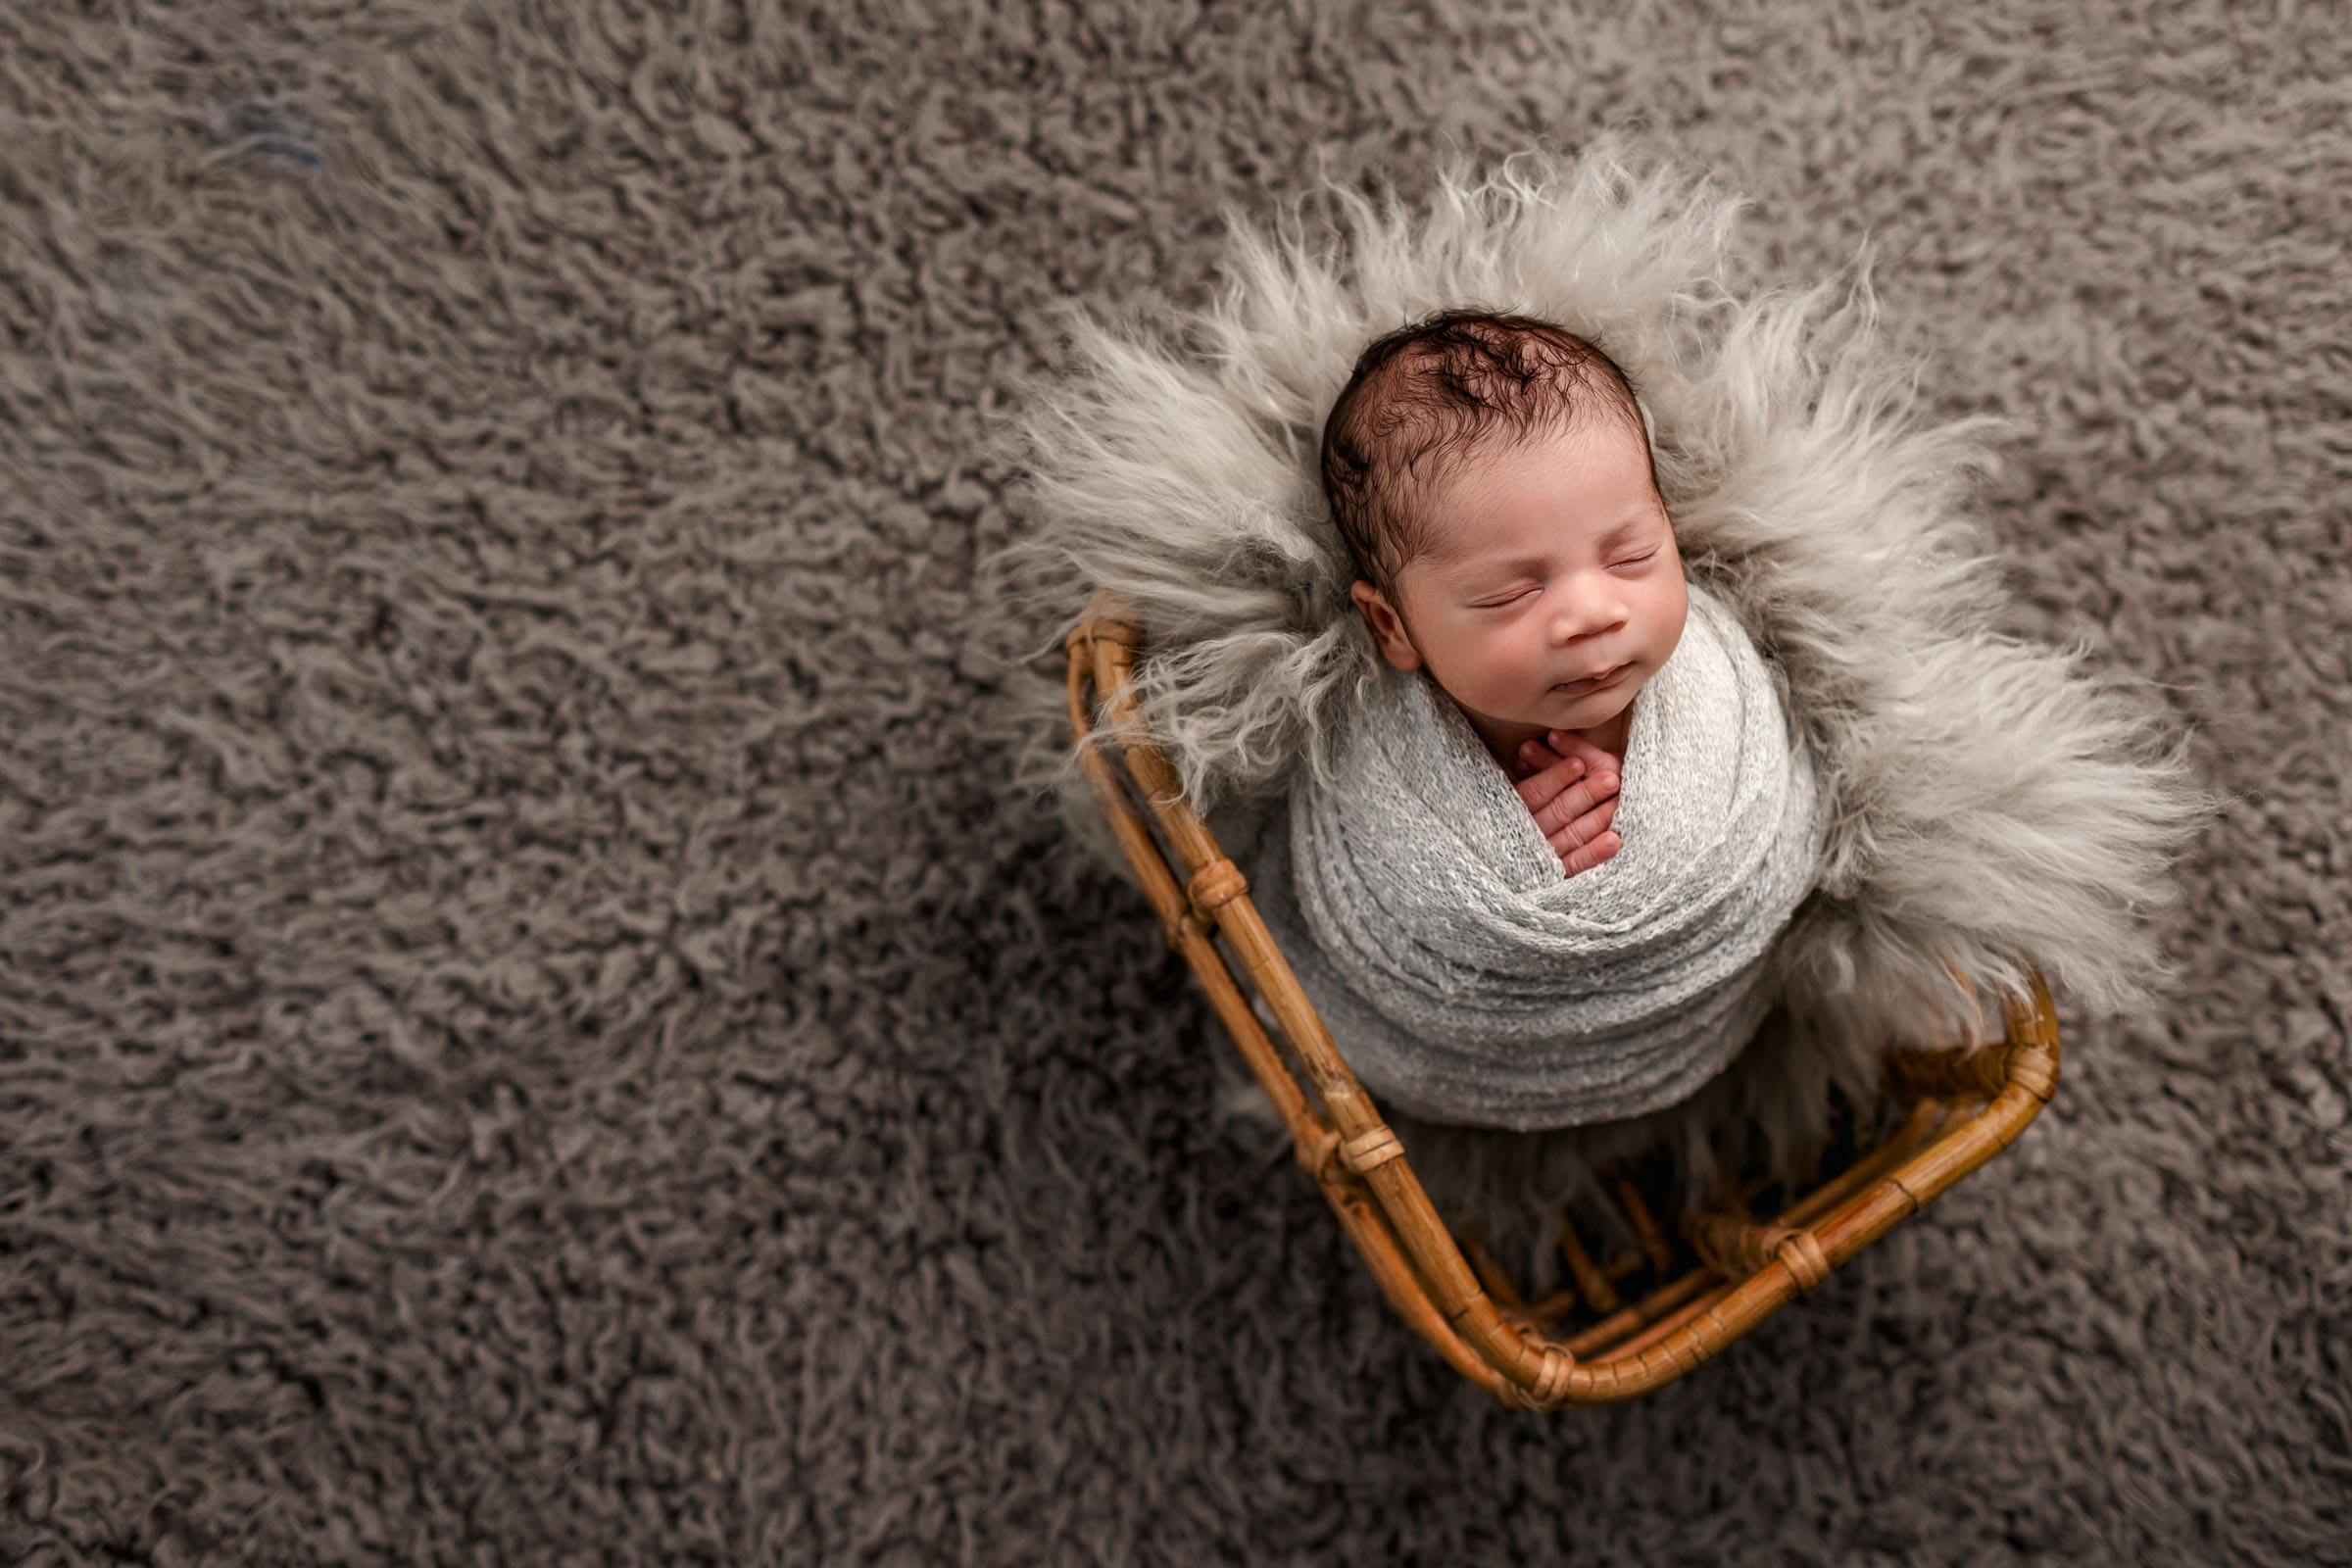 The Wicker Basket is another favorite newborn prop I use for newborn pictures